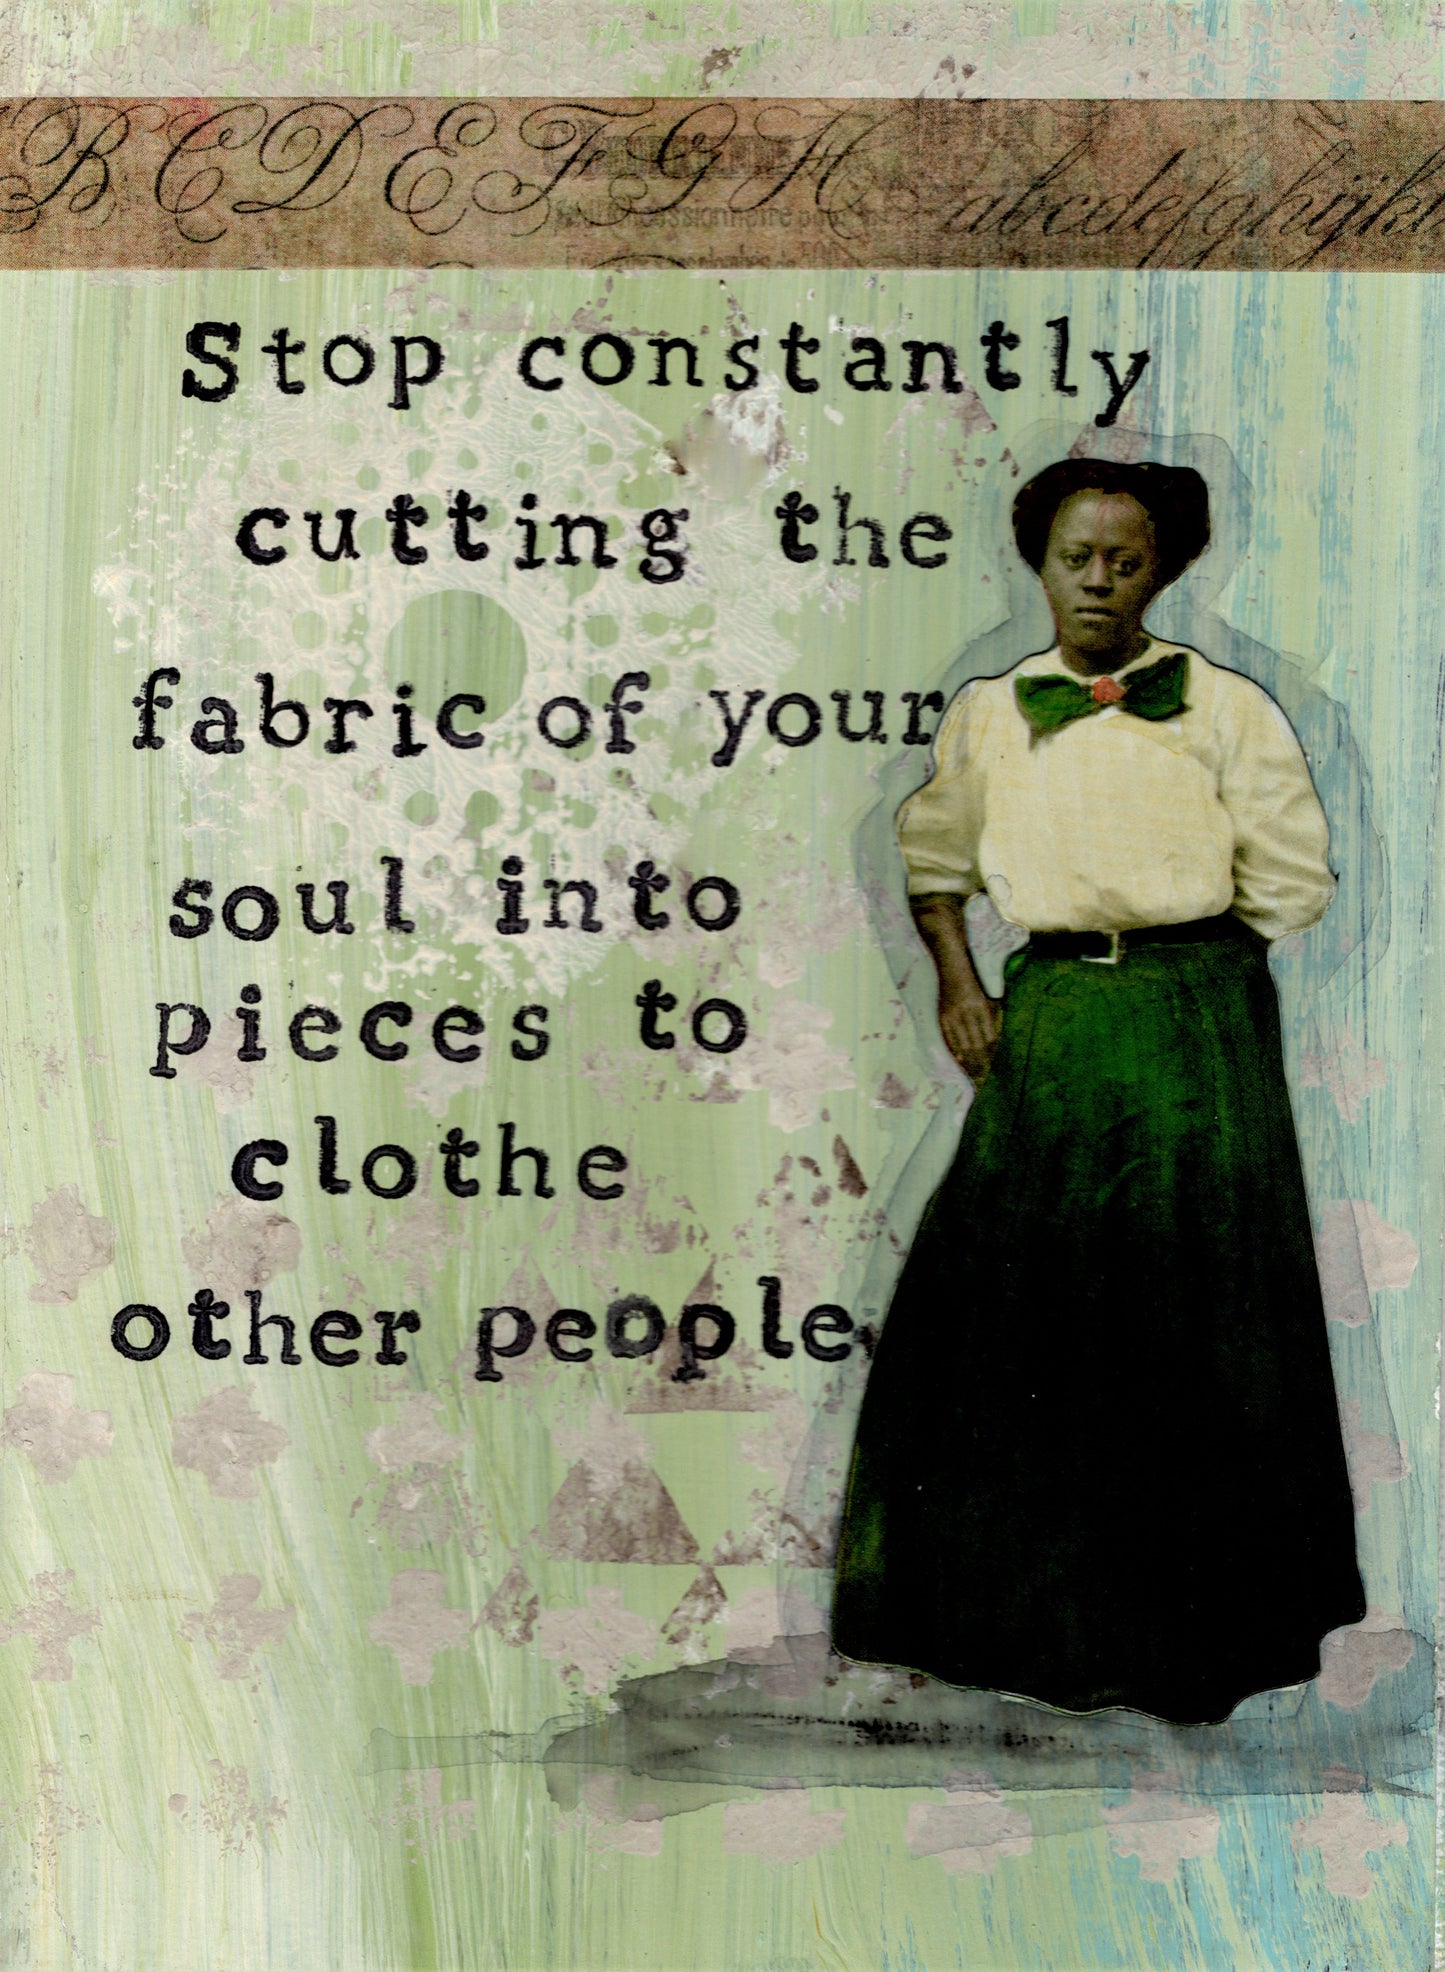 Stop constantly cutting the fabric of your soul into pieces to clothe other people.